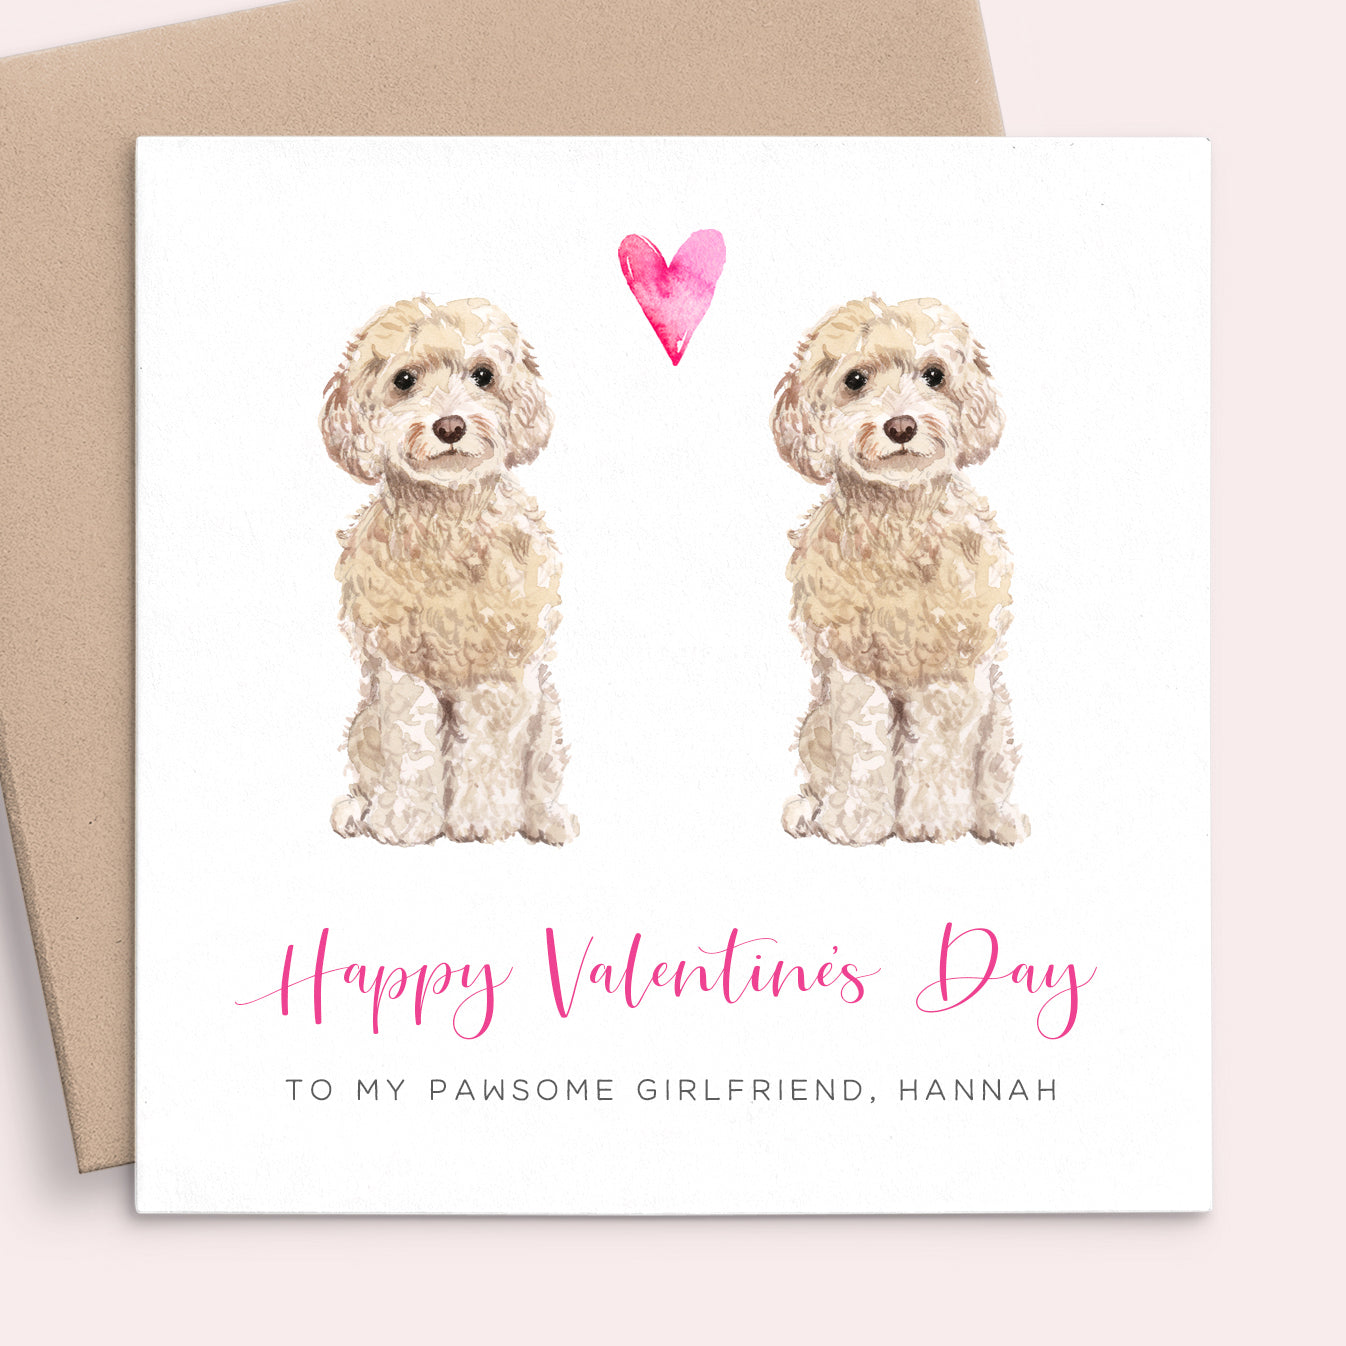 dog valentines day card girlfriend customised by breed personalised with name matte white cardstock kraft brown envelope square